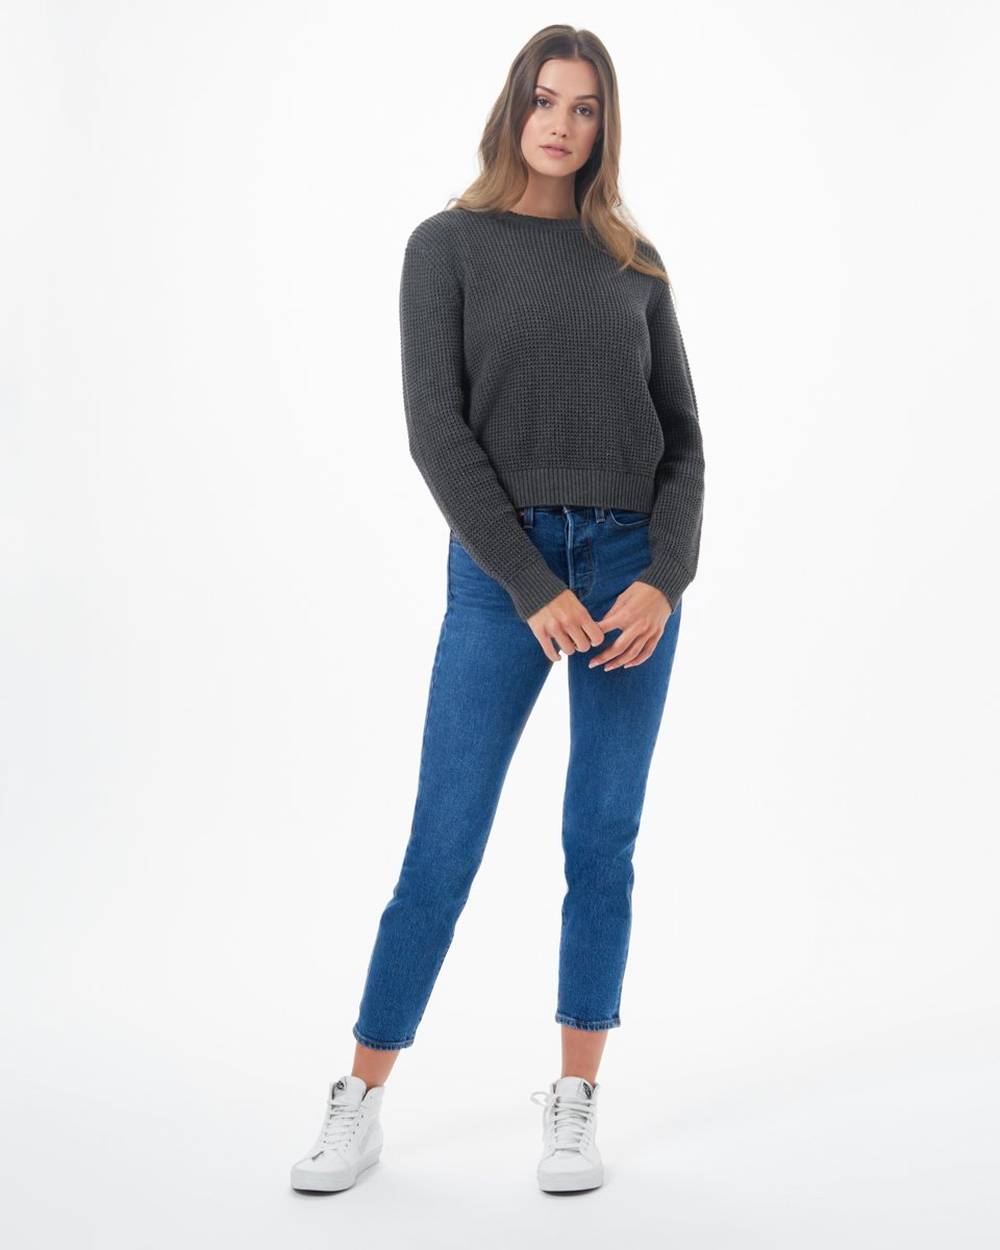 10 Best Affordable, Ethical, And Vegan Sweater Brands | Panaprium